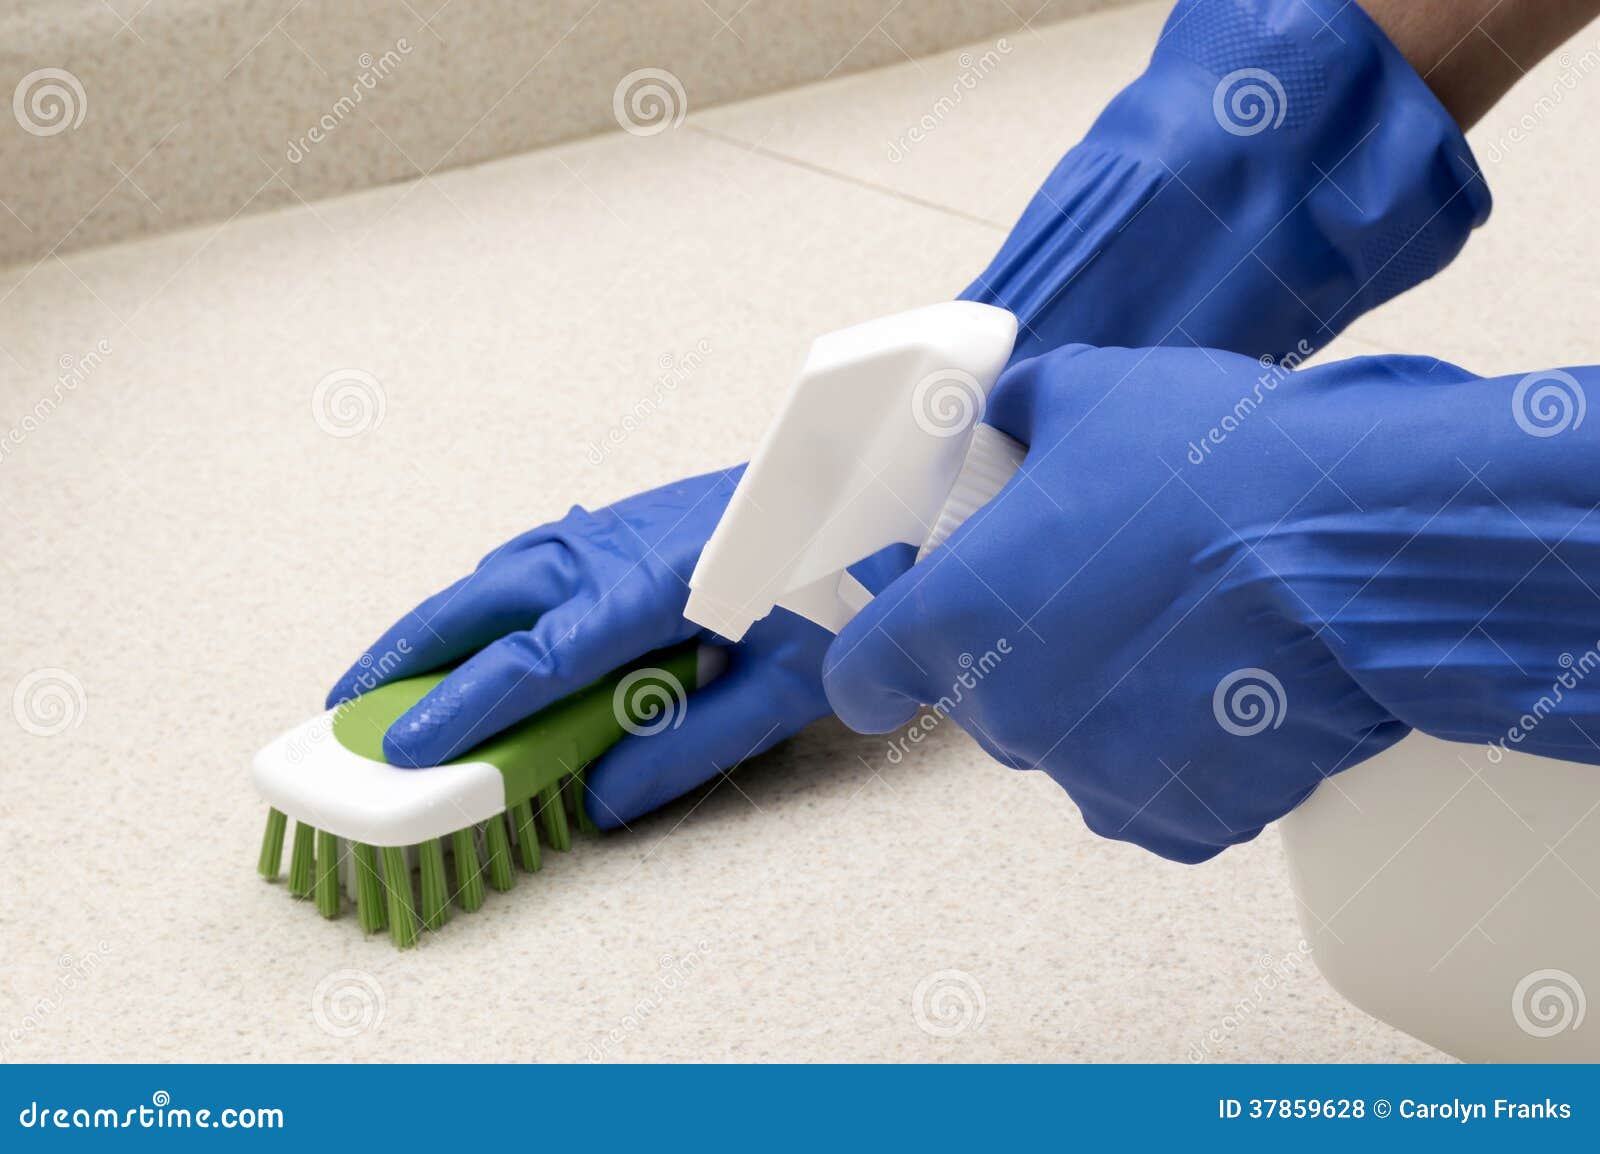 cleaning and scrubbing with rubber gloves